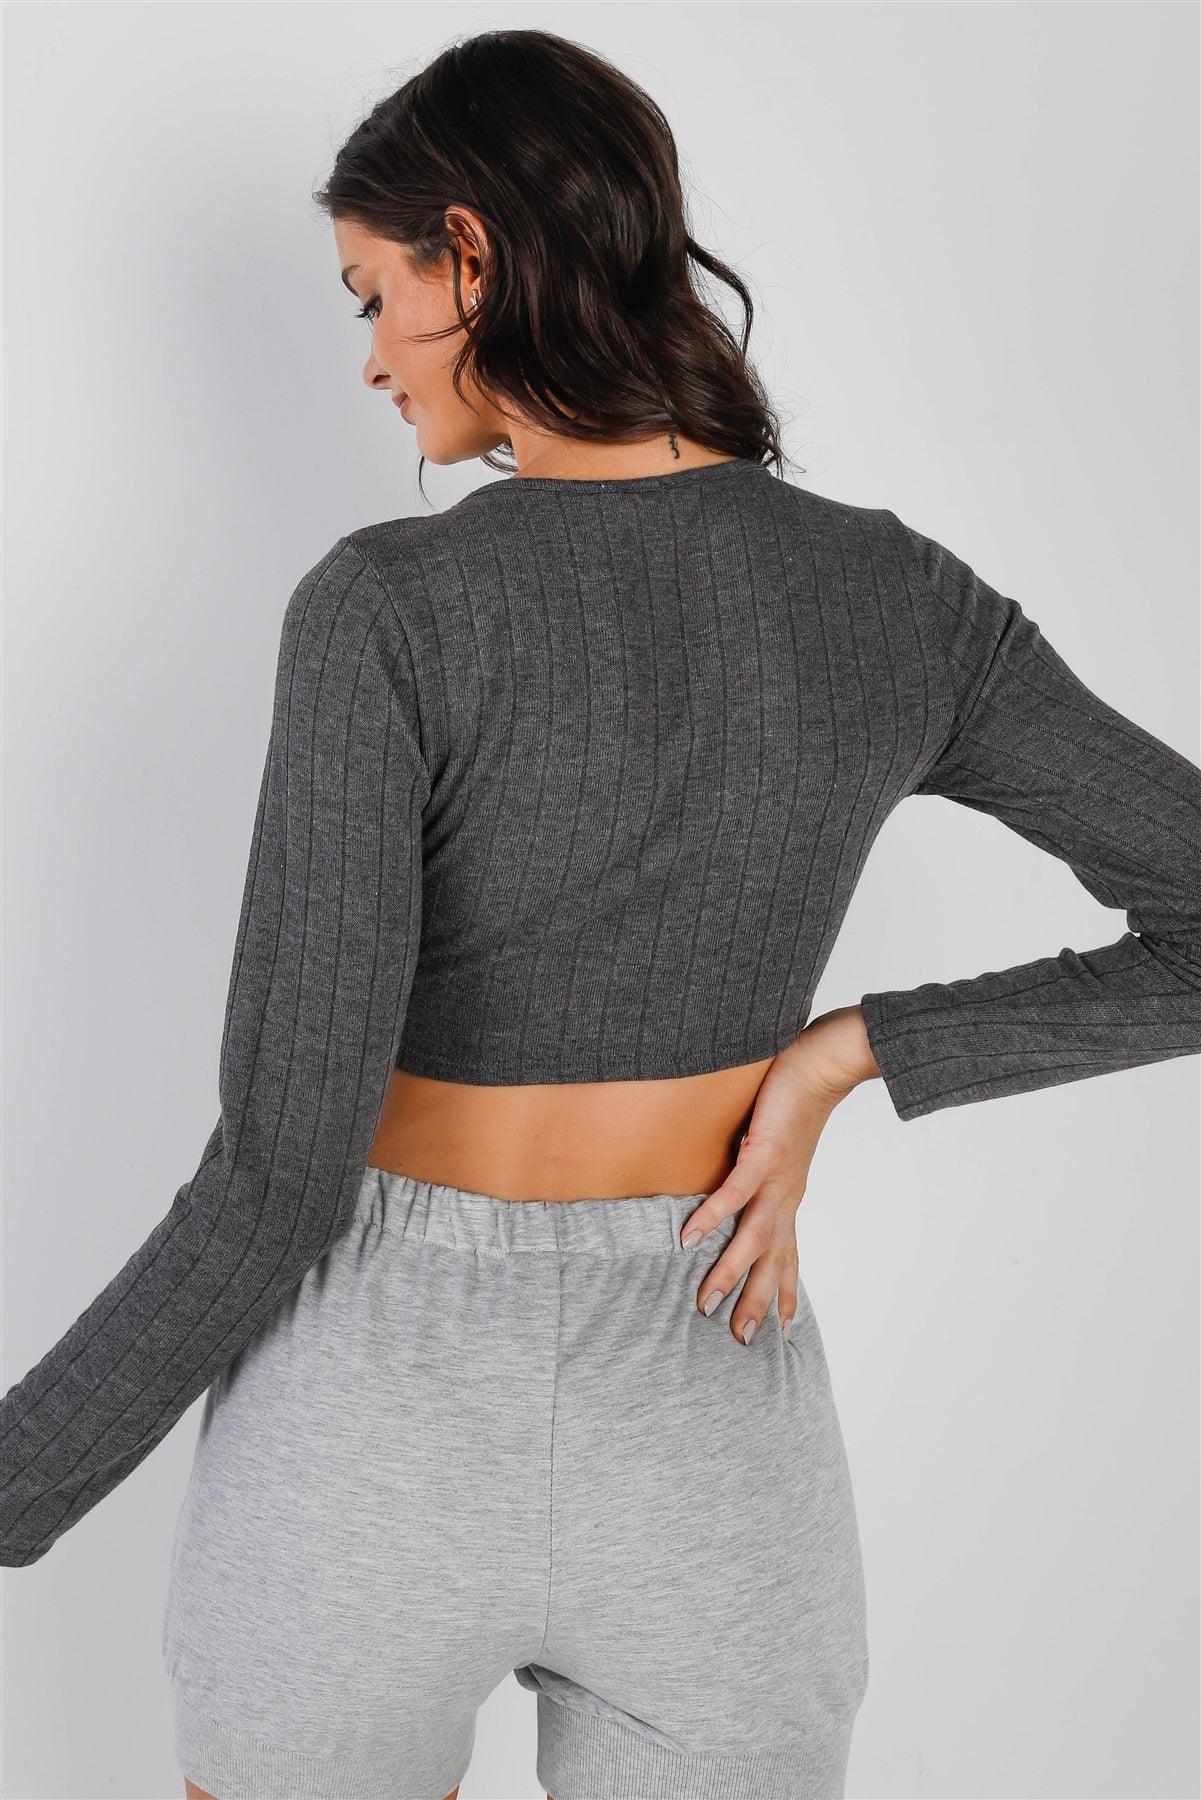 Charcoal Bow Detail V-Neck Long Sleeve Top /3-2-1